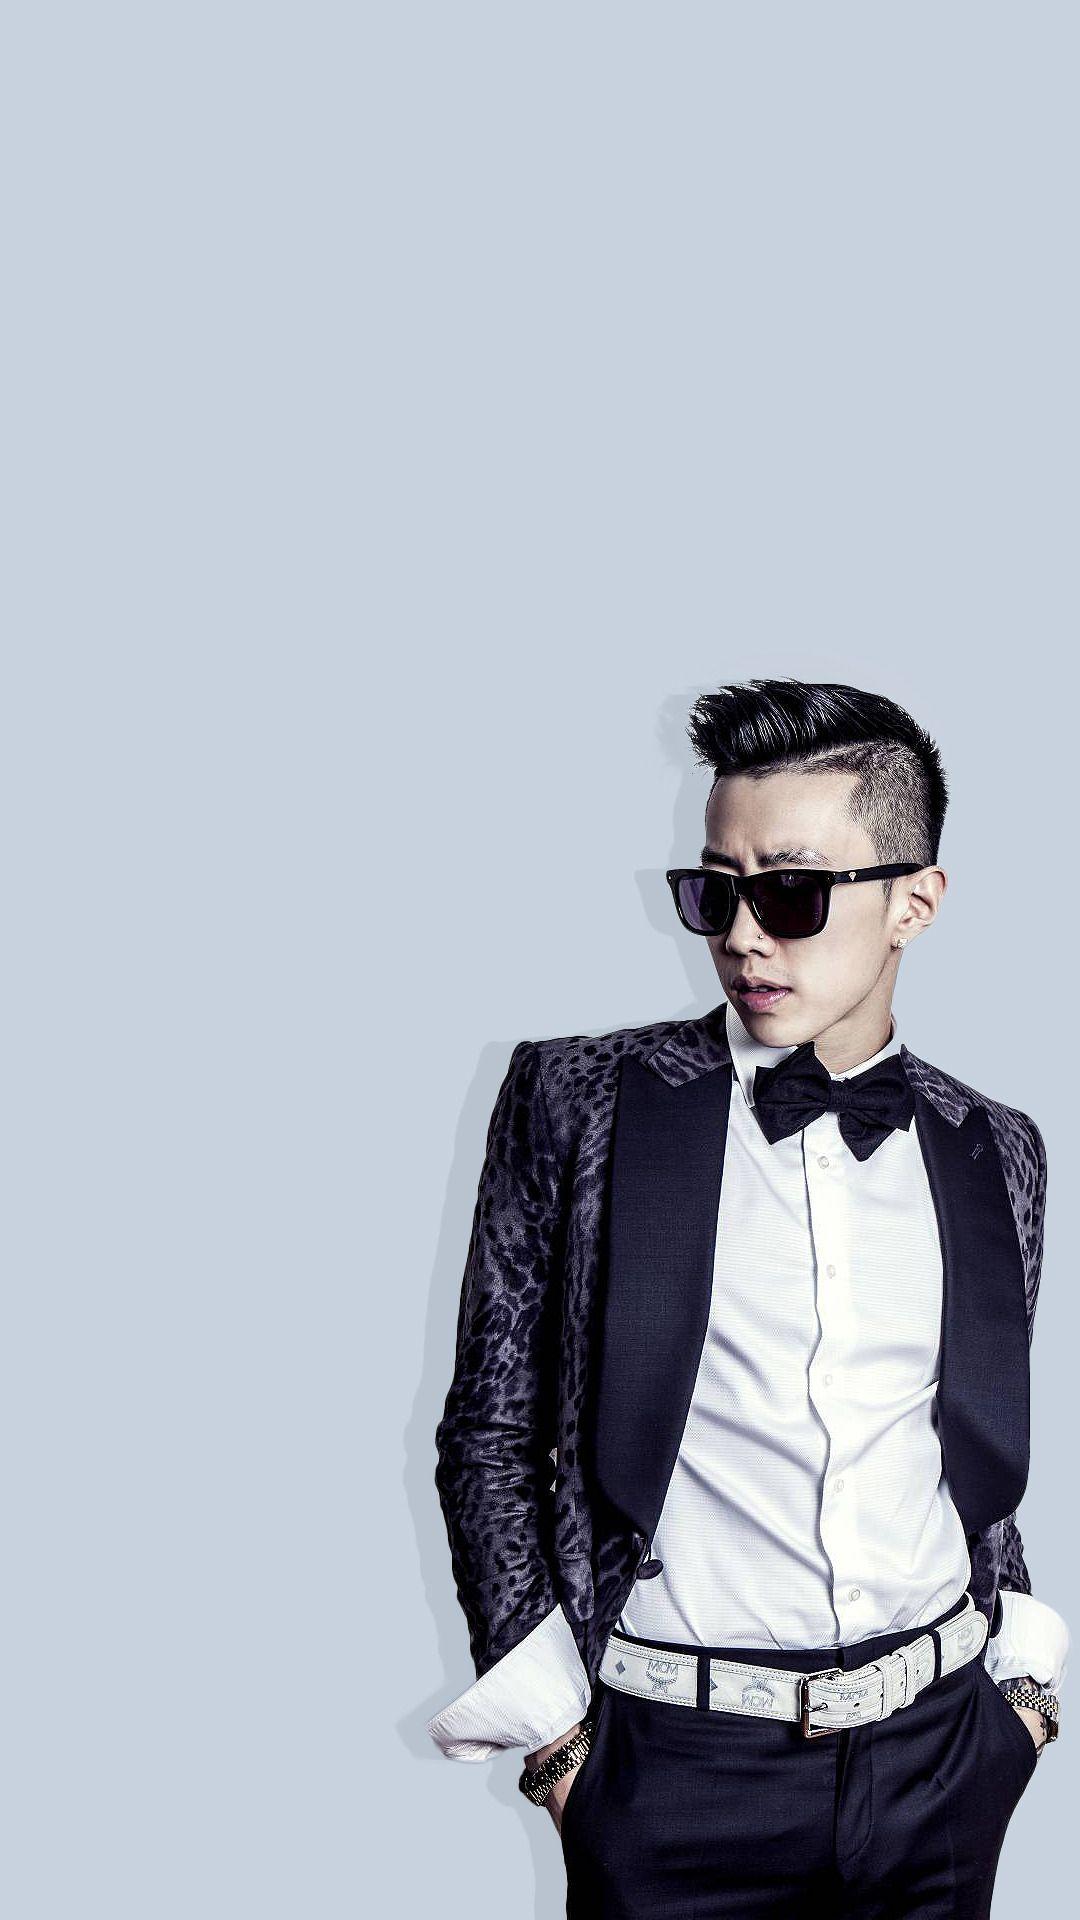 ✧・ﾟ: *✧・ﾟ:*, PASTEL JAY PARK WALLPAPERS 1080x1920px please